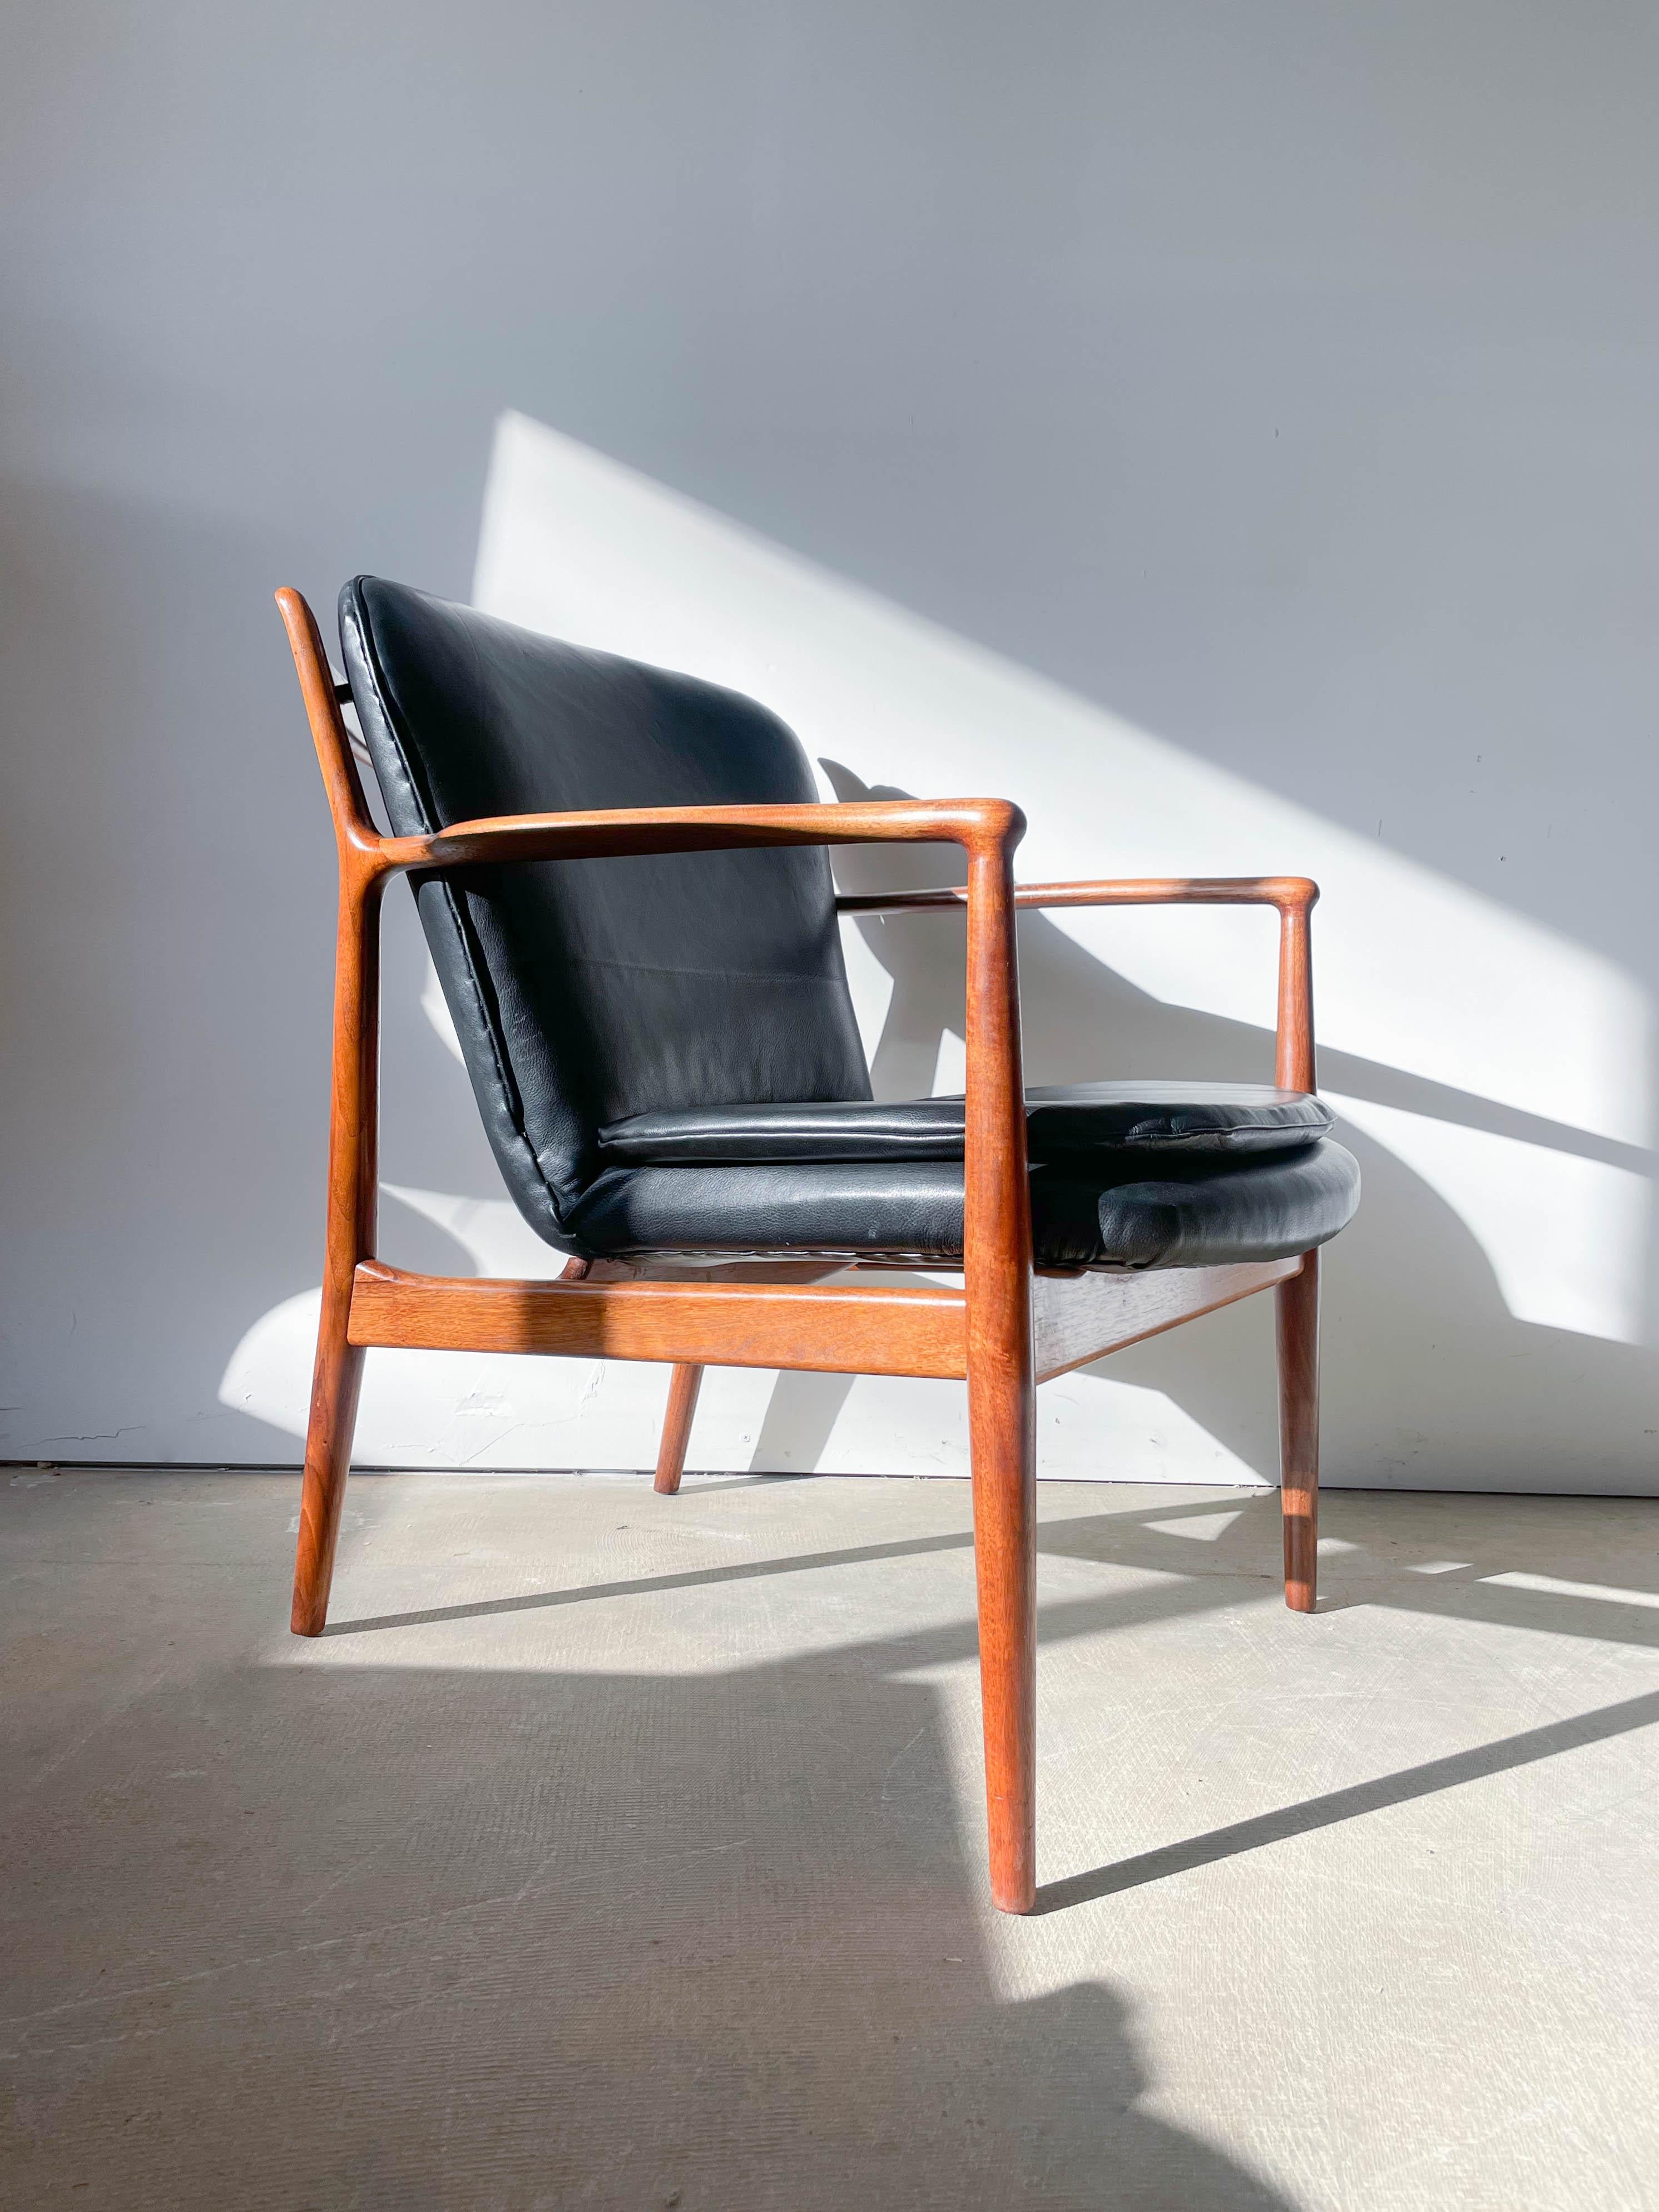 This is one of the best known chairs that shaped the way the world viewed Danish Modern design. The Delegate chair was designed by Finn Juhl in the early 1950s for the United Nations's headquarters in New York -- specifically, the Trusteeship